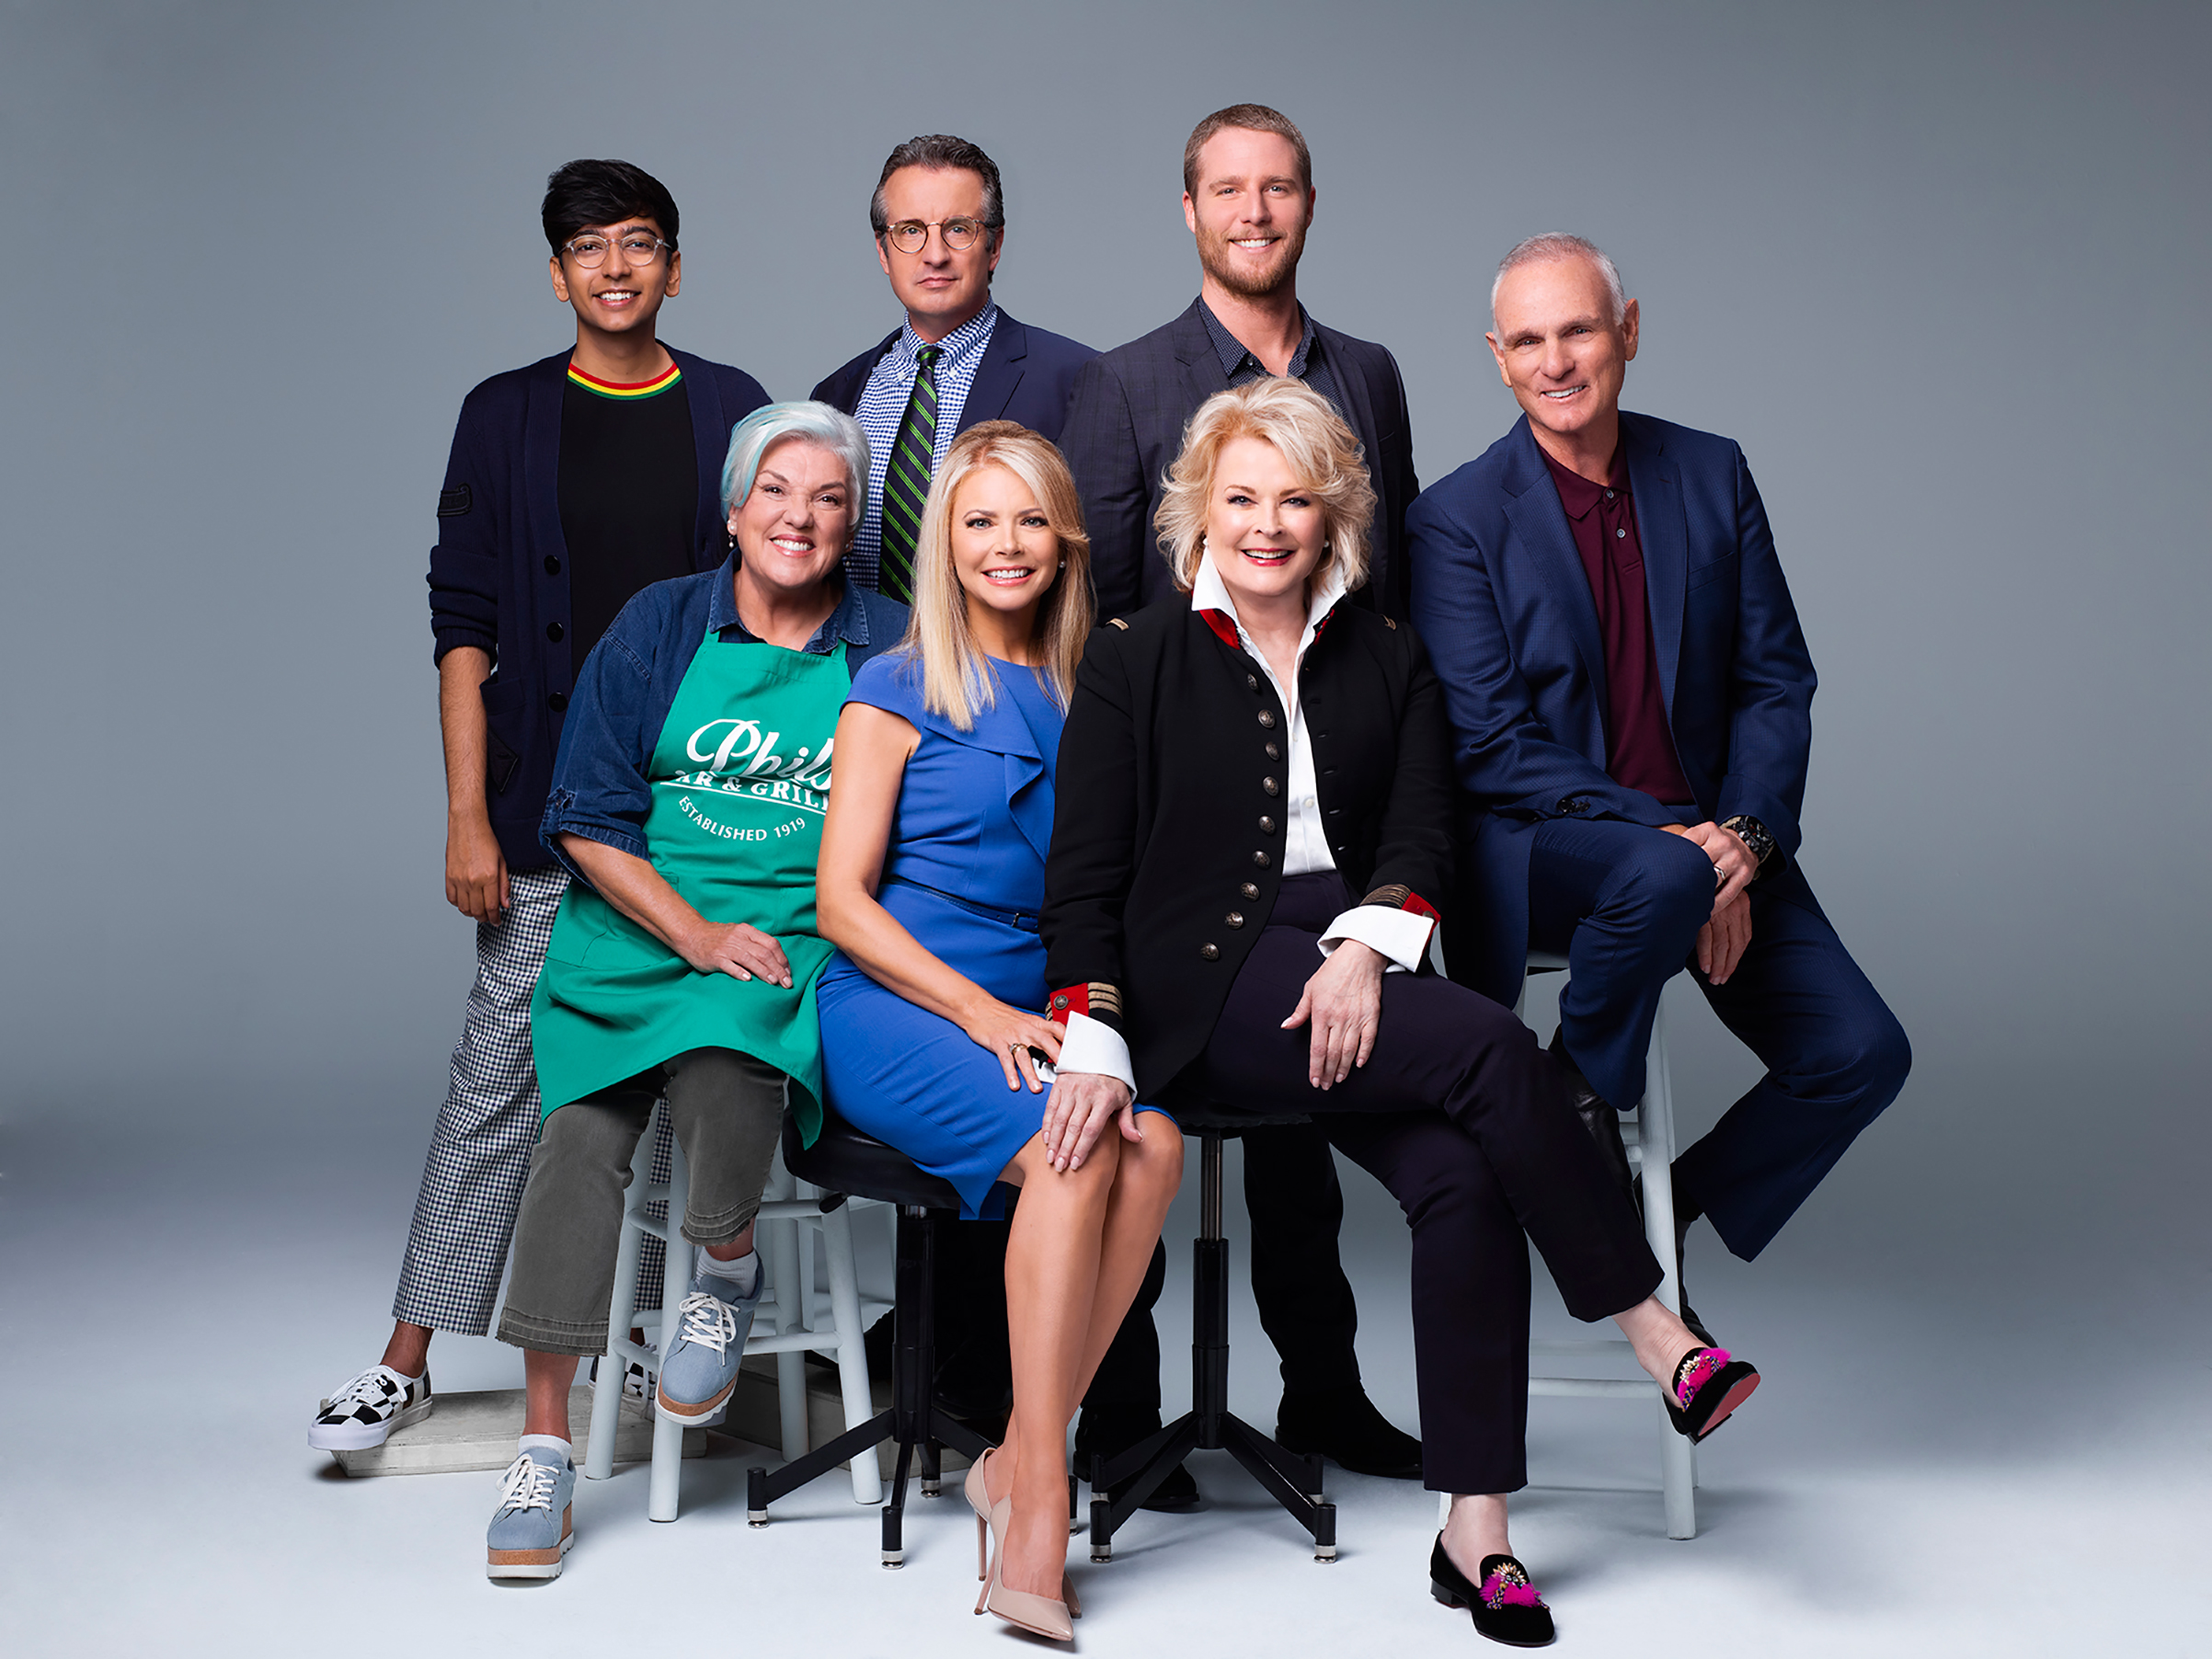 Multiple Emmy Award winners Candice Bergen and series creator Diane English reunite for MURPHY BROWN, the revival of the ground-breaking comedy about the eponymous broadcast news legend and her biting take on current events, now in a world of 24-hour cable, social media, 'fake news' and a vastly different political climate. (Robert Tractenberg—CBS)